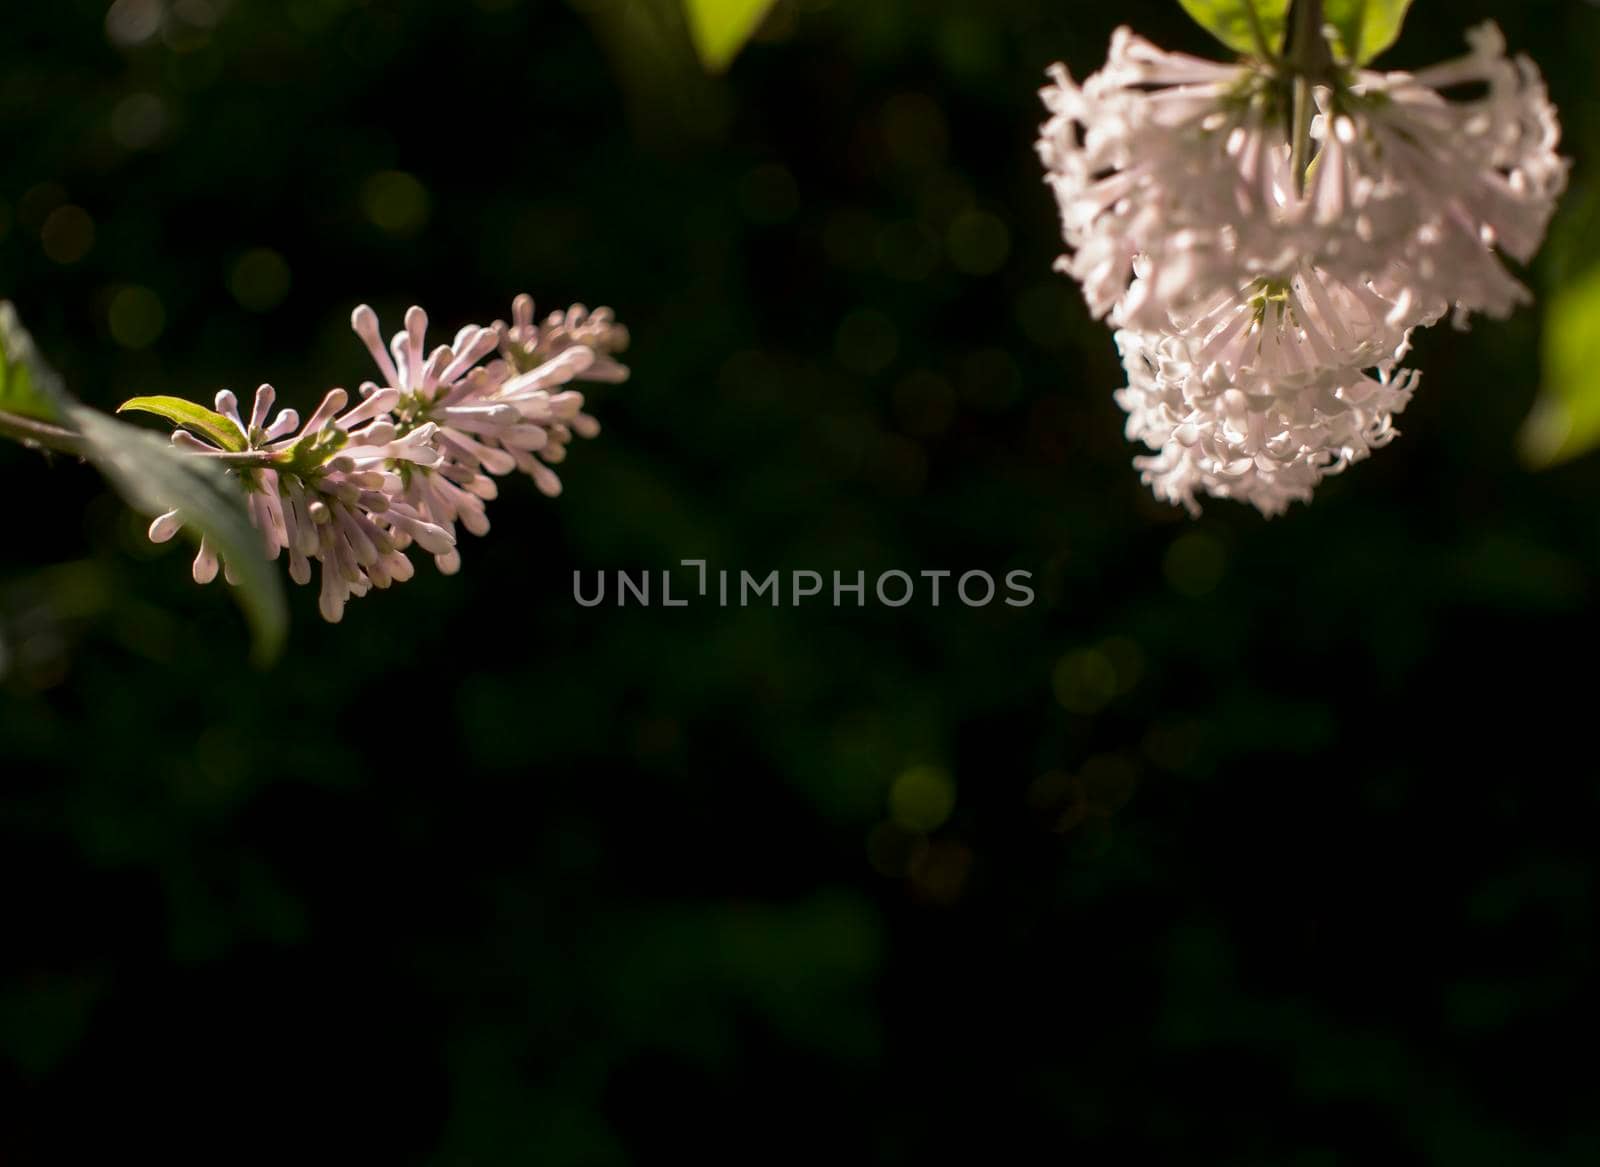 Flower background - lilac flowers in spring garden . High quality photo